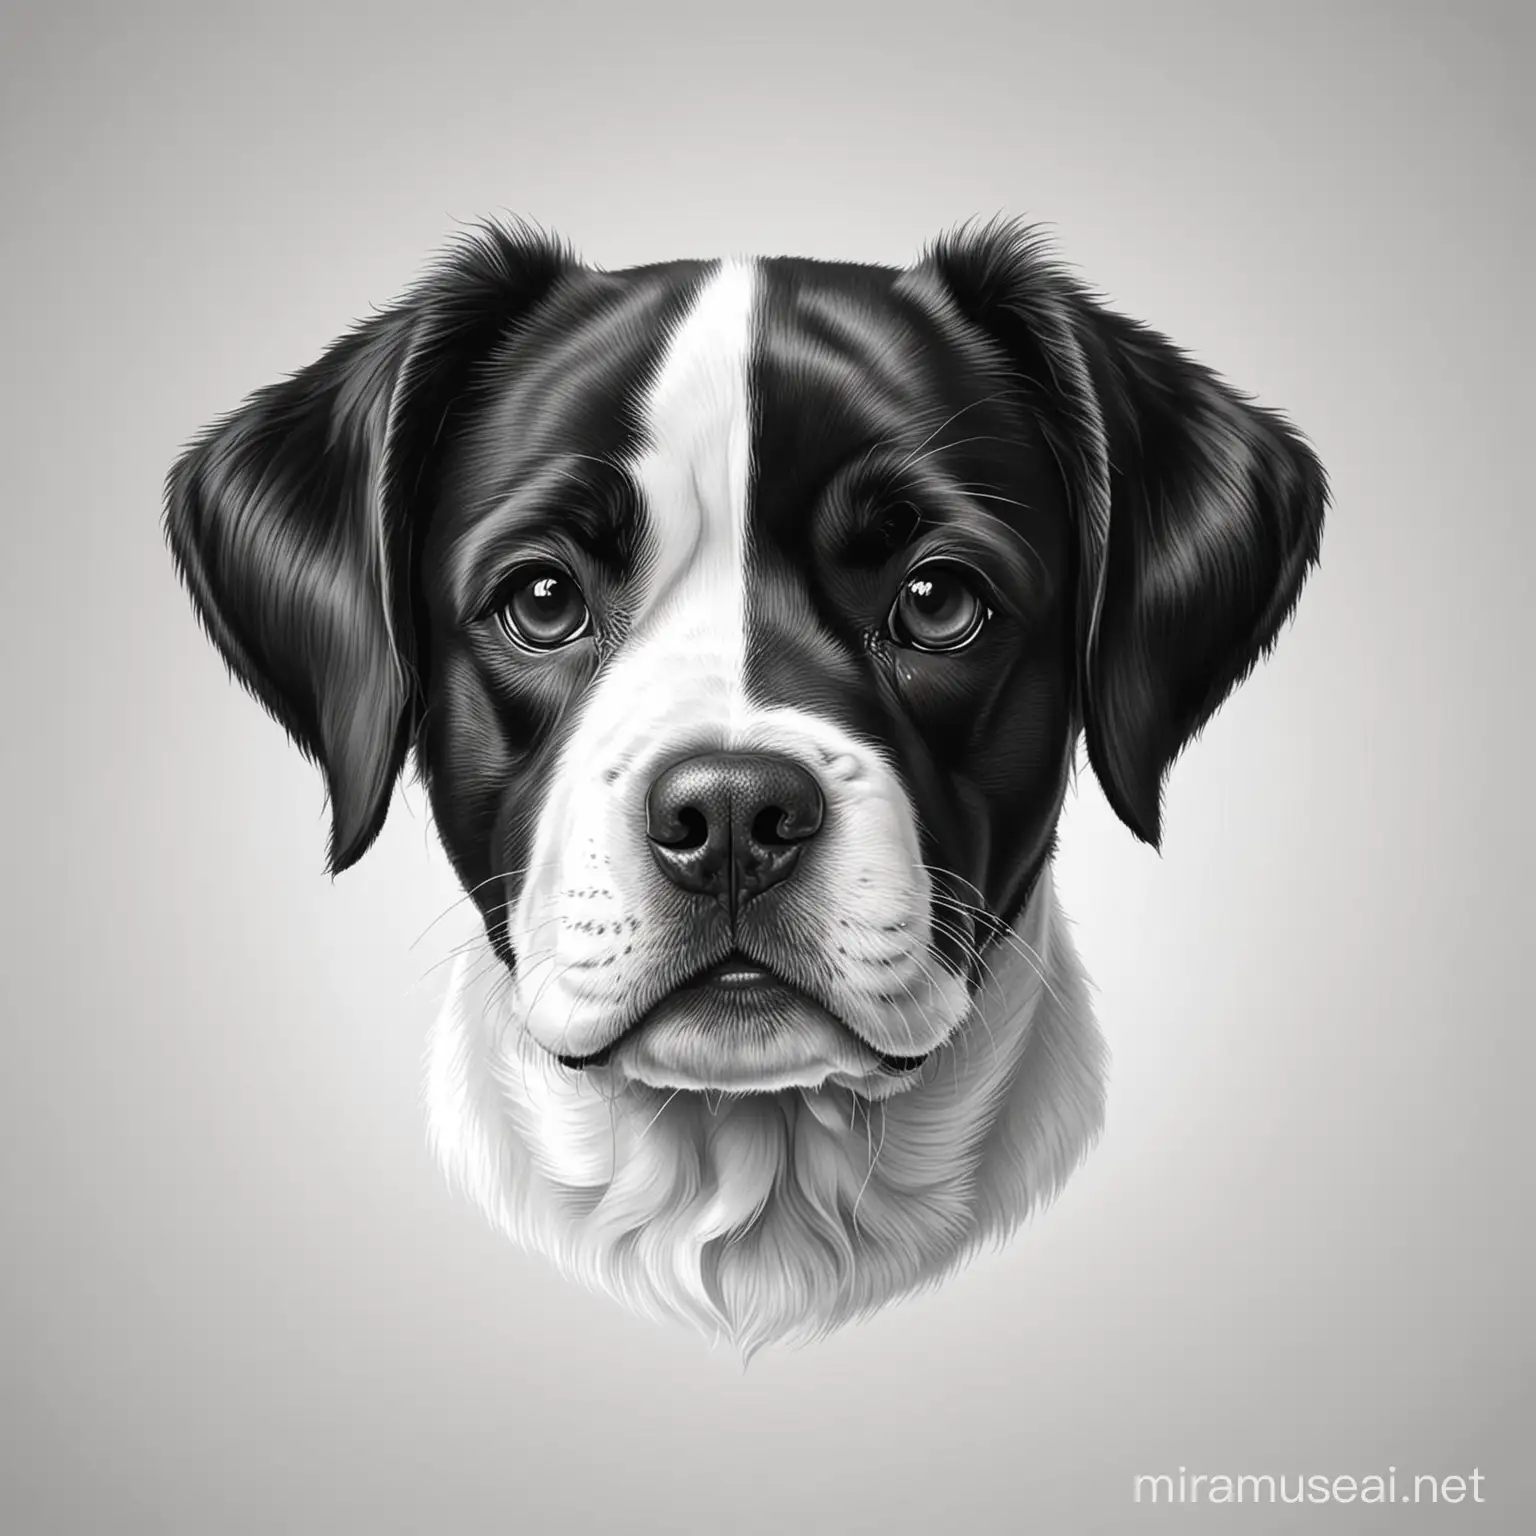 Dog face black and white vector white background